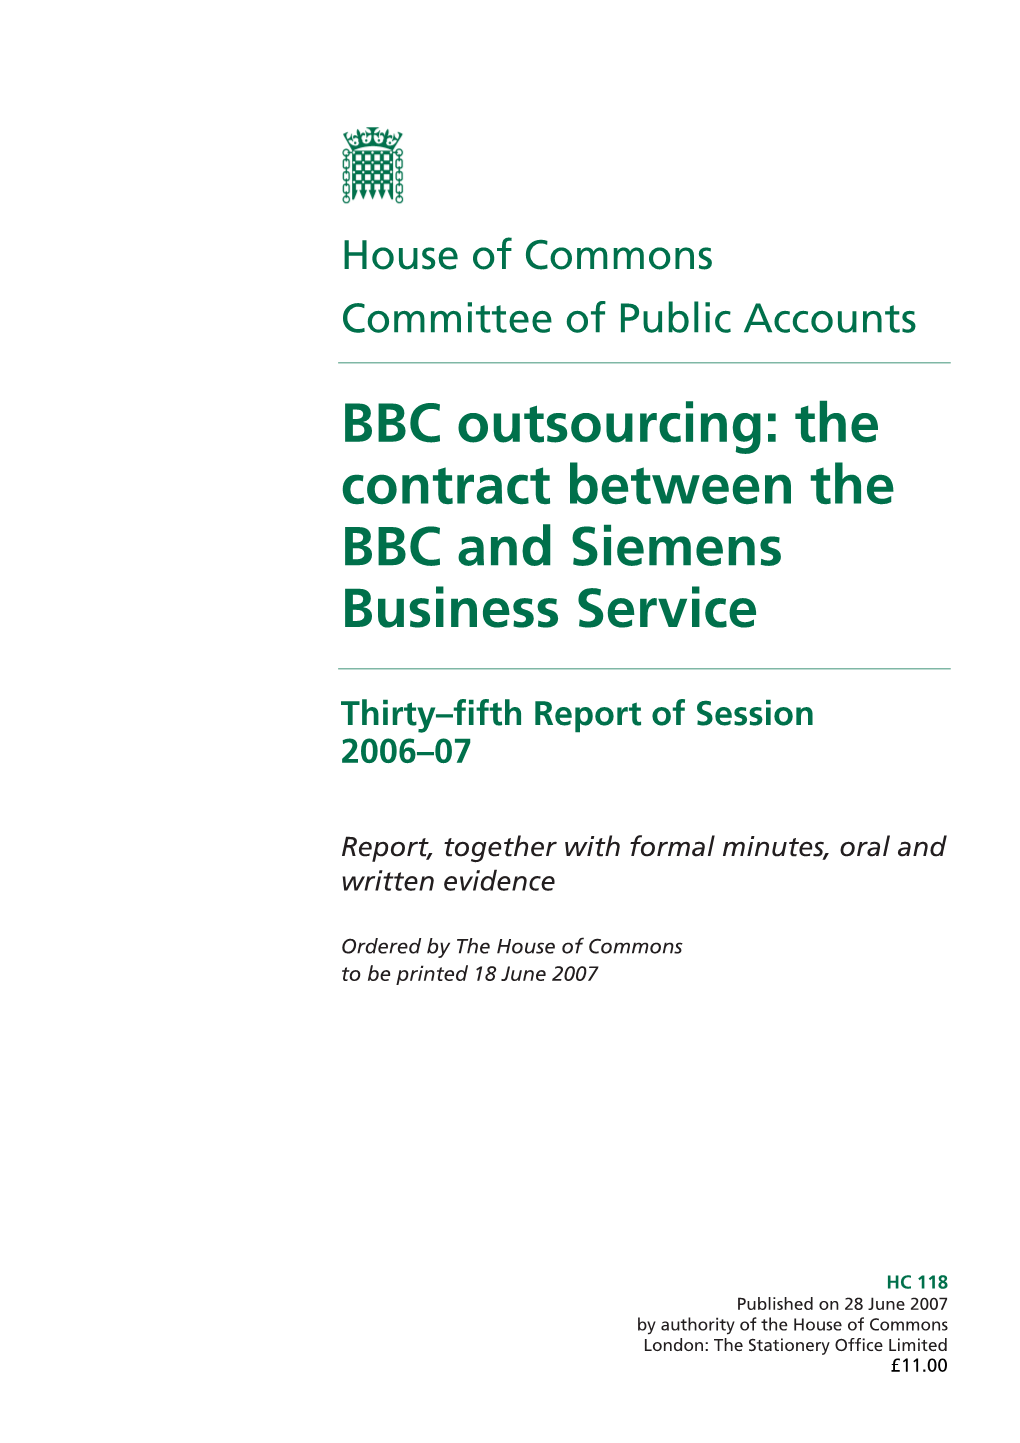 BBC Outsourcing: the Contract Between the BBC and Siemens Business Service